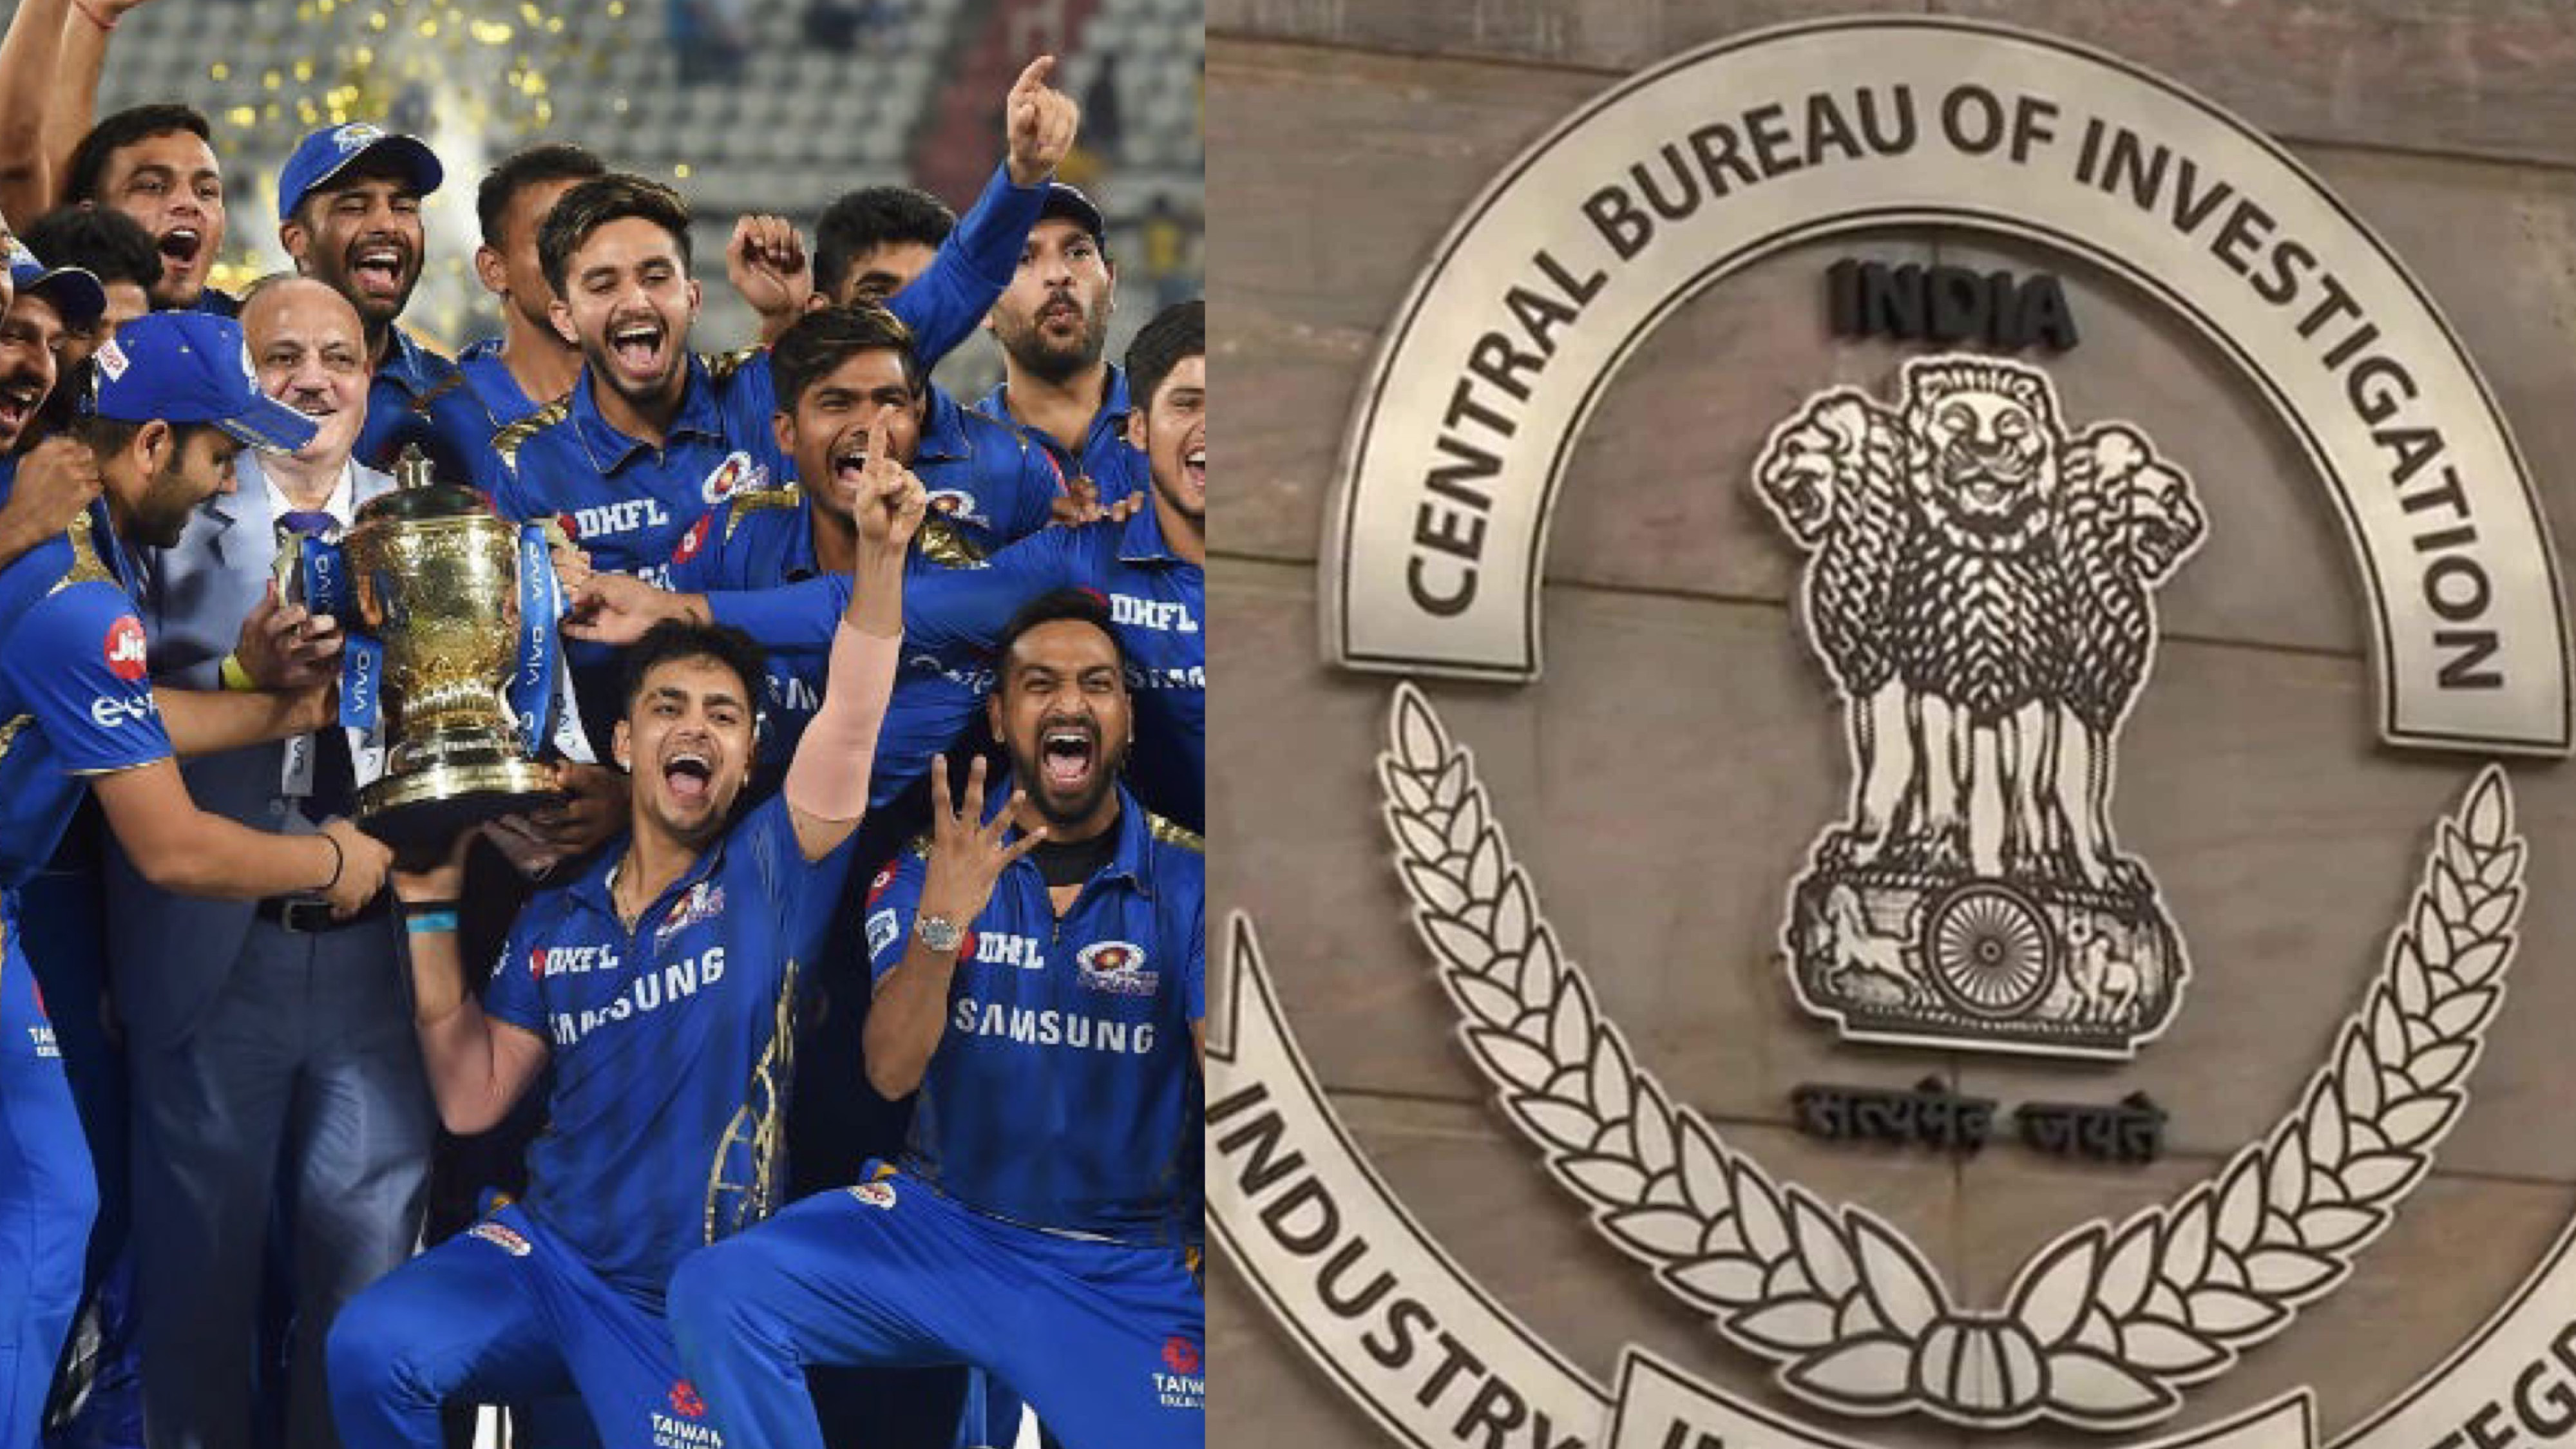 CBI books 3 persons in connection with alleged match fixing, betting in IPL 2019; Pakistan angle being probed